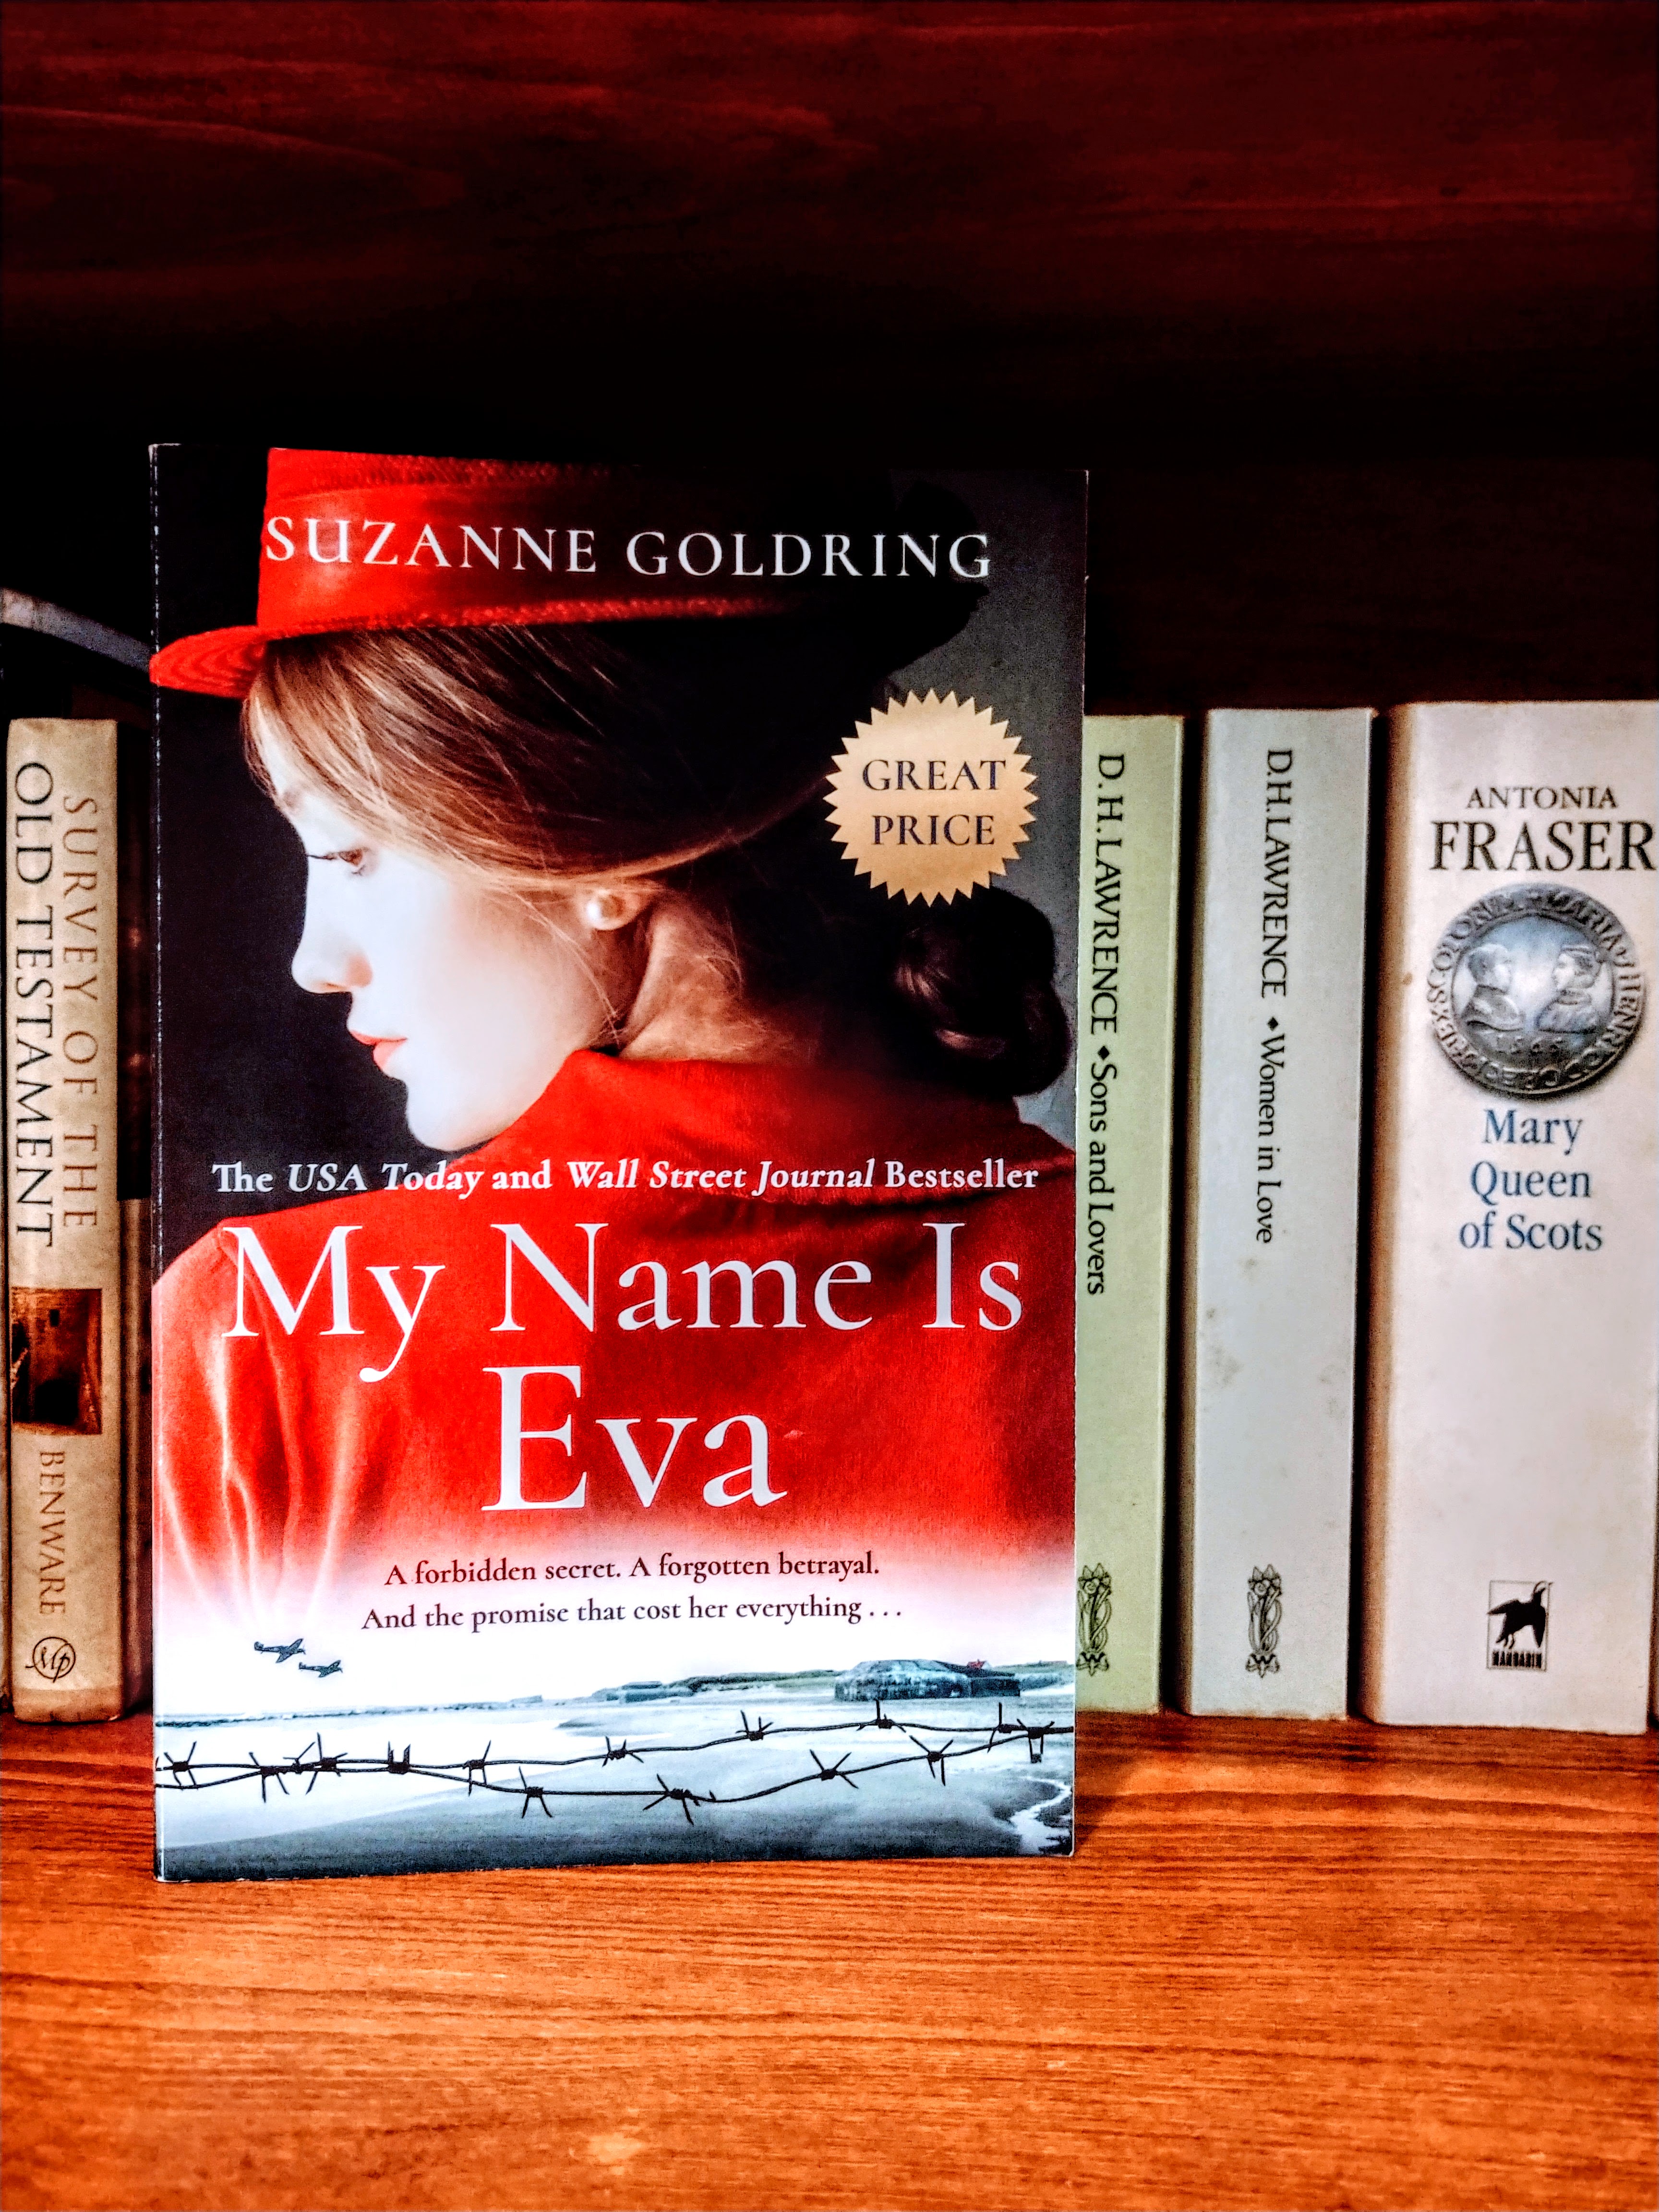 Sincerely Loree: My Name Is Eva by Suzanne Goldring